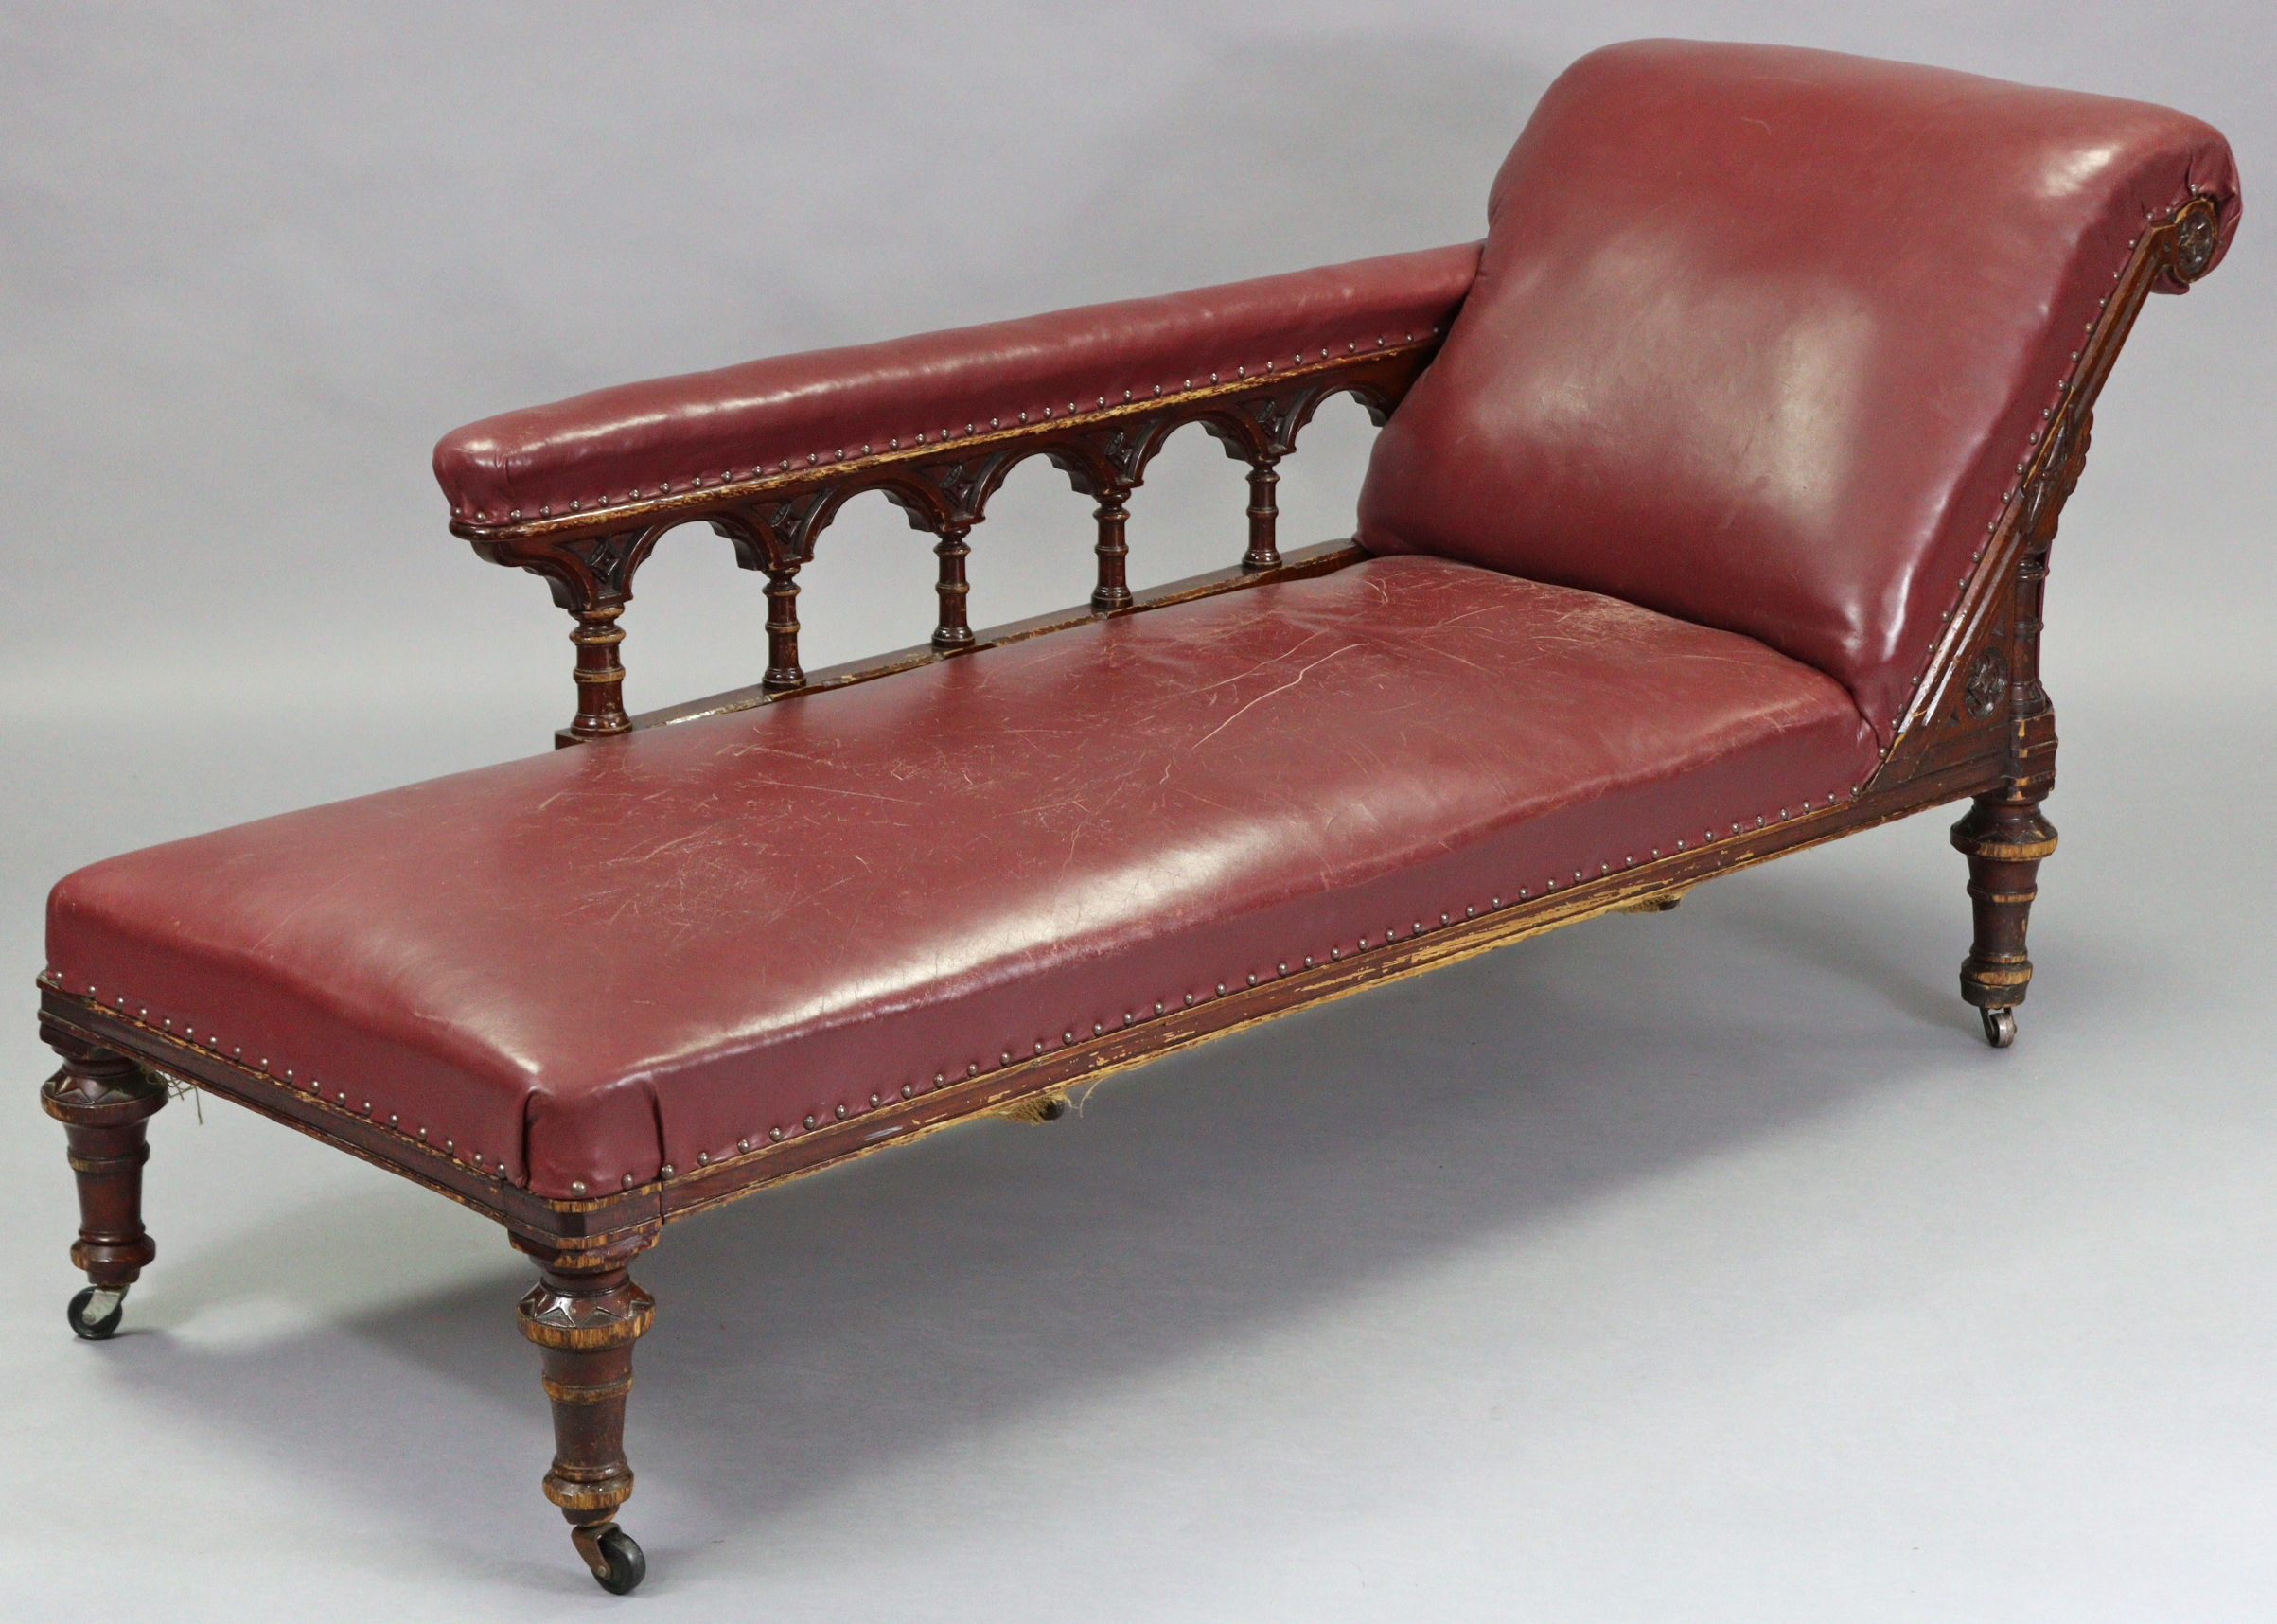 A Victorian carved oak frame chaise longue upholstered brass-studded crimson leather, with foliate